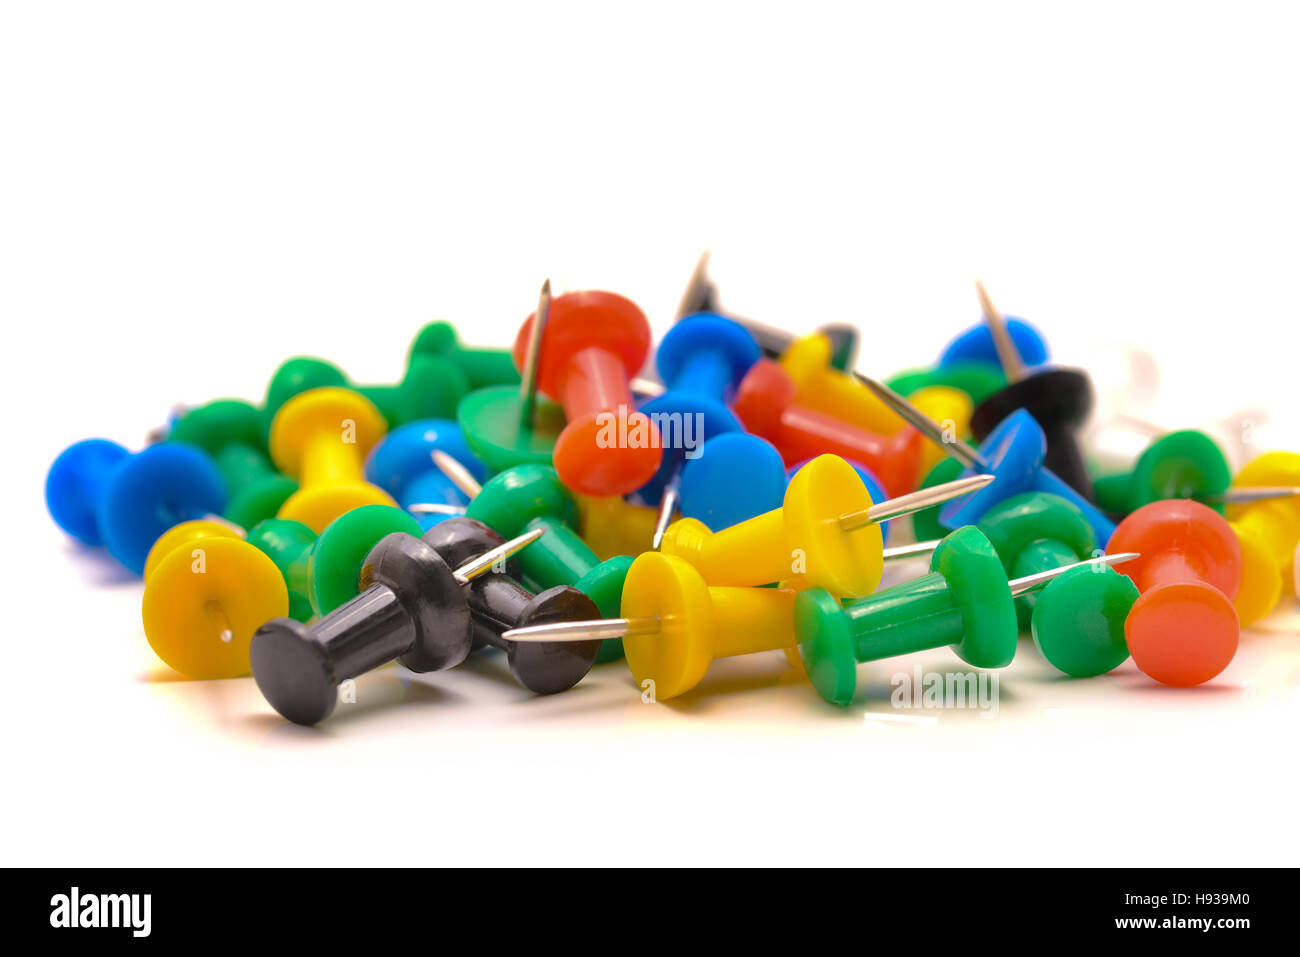 Thumbtacks on the table in natural light Stock Photo